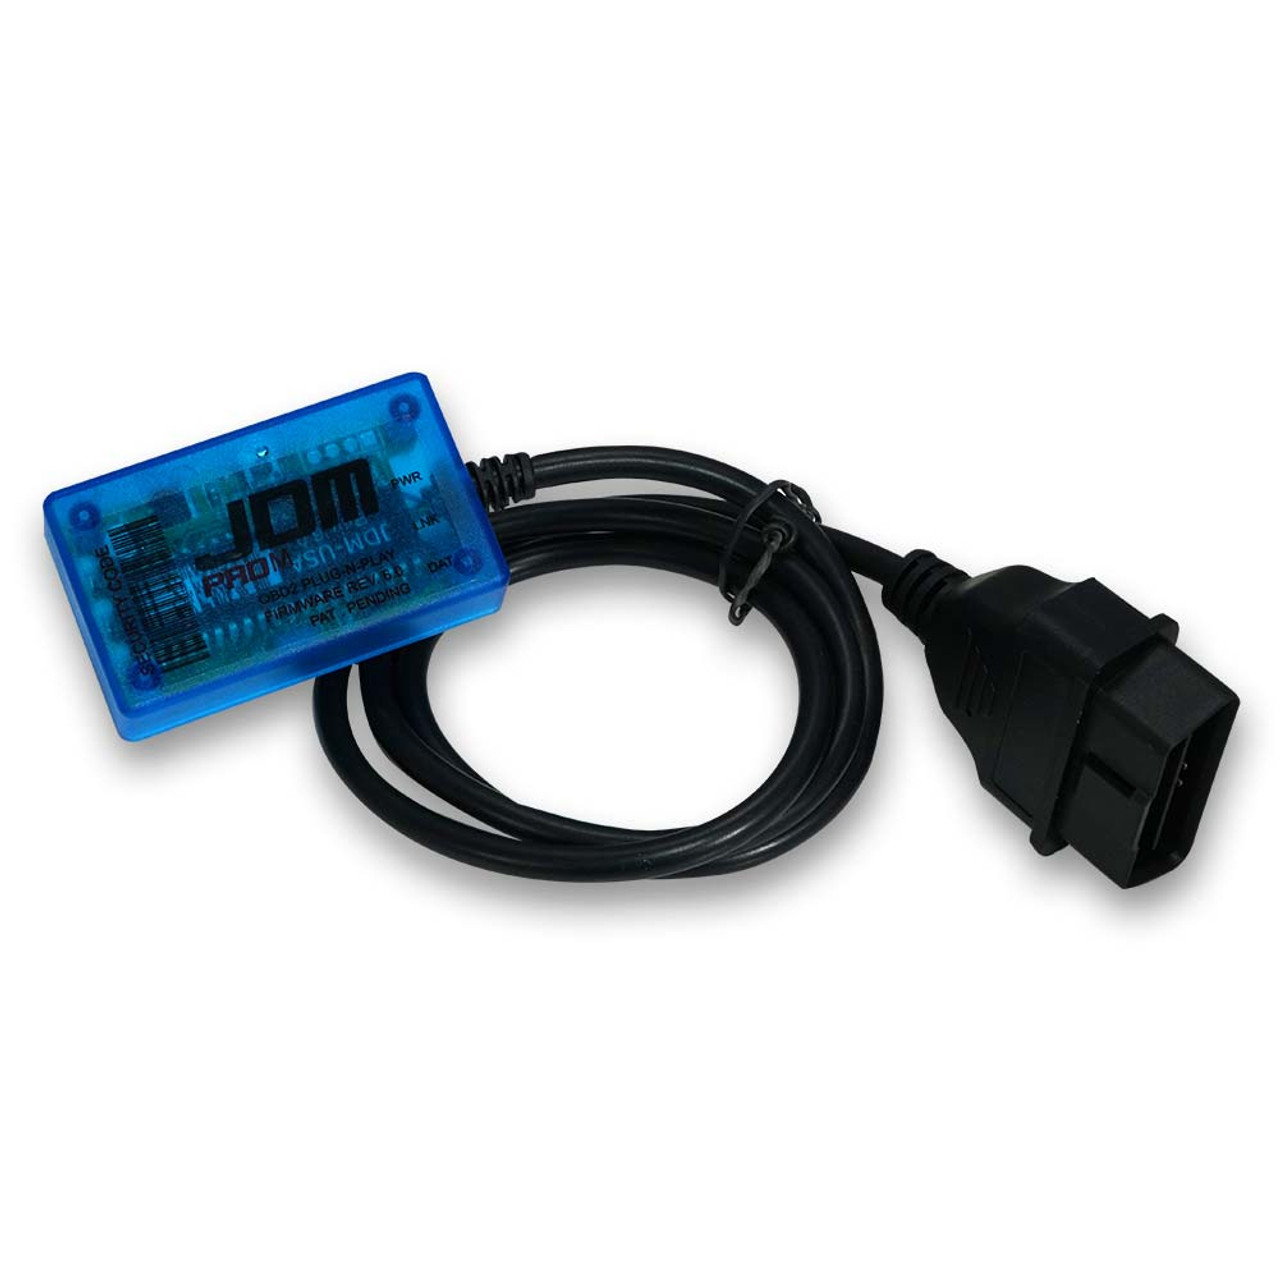 Stage 1 Performance Chip Module OBD2 for BMW - Performance Chip Tuning